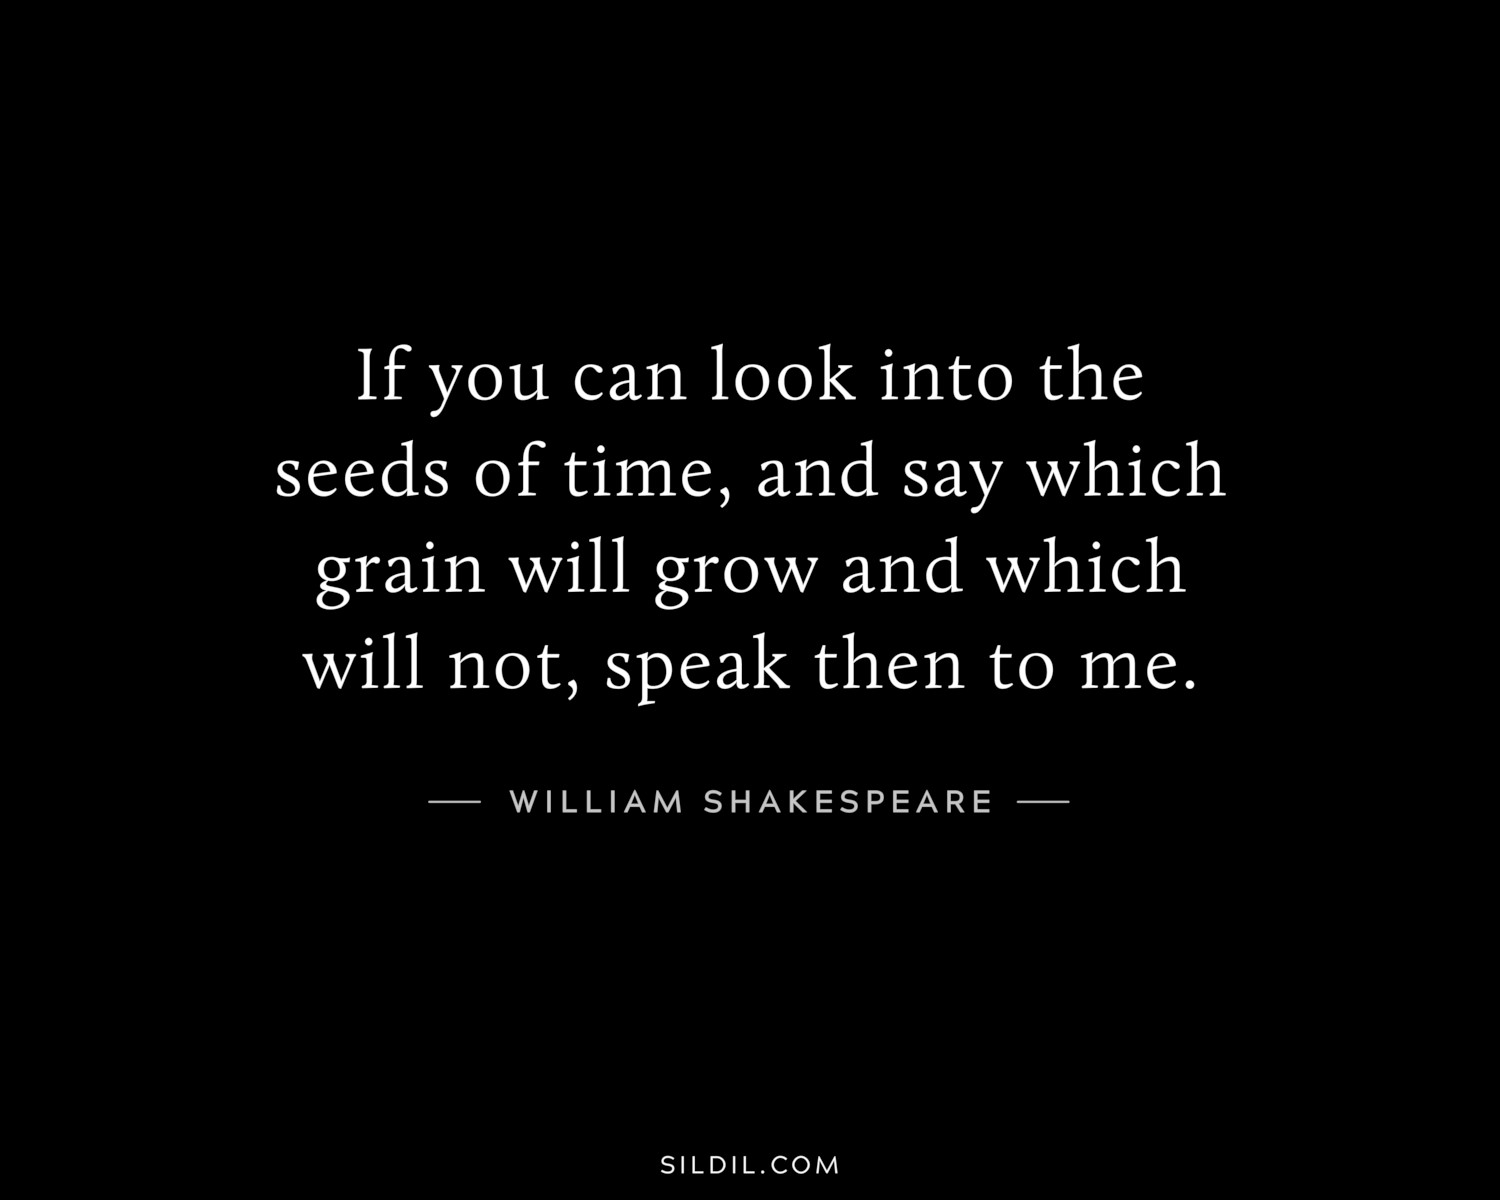 If you can look into the seeds of time, and say which grain will grow and which will not, speak then to me.